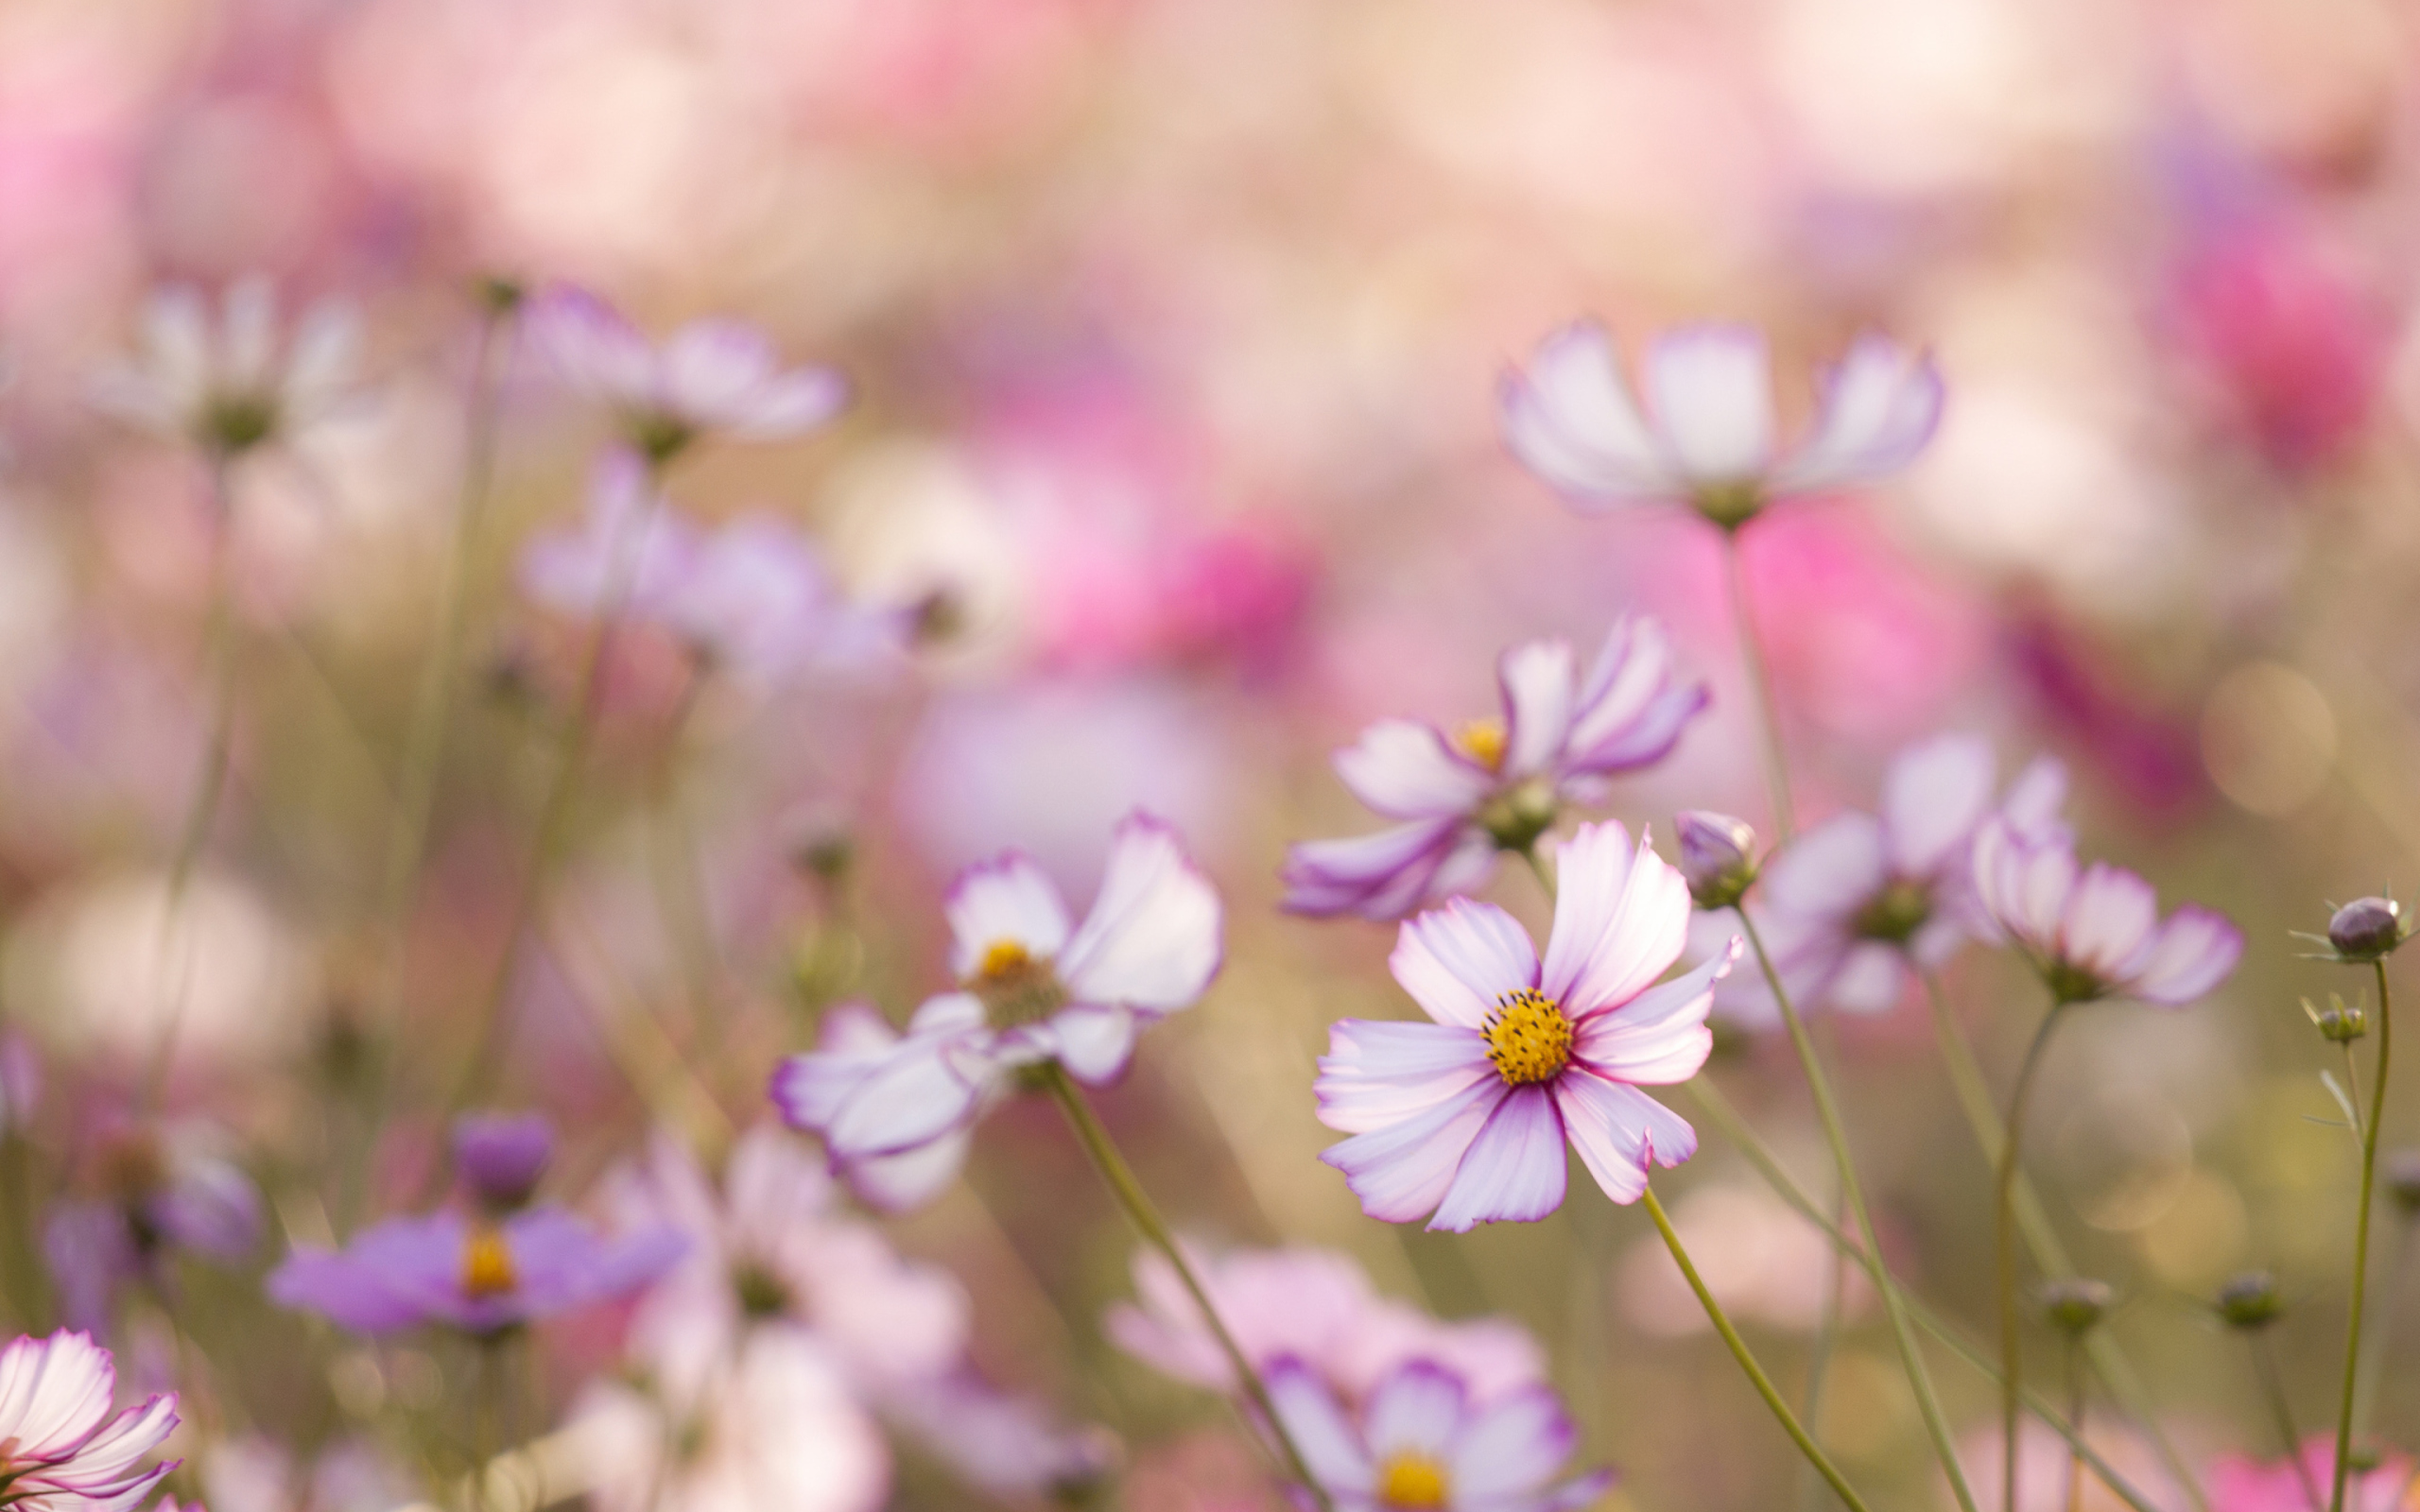 Das Field Of White And Pink Petals Wallpaper 2560x1600